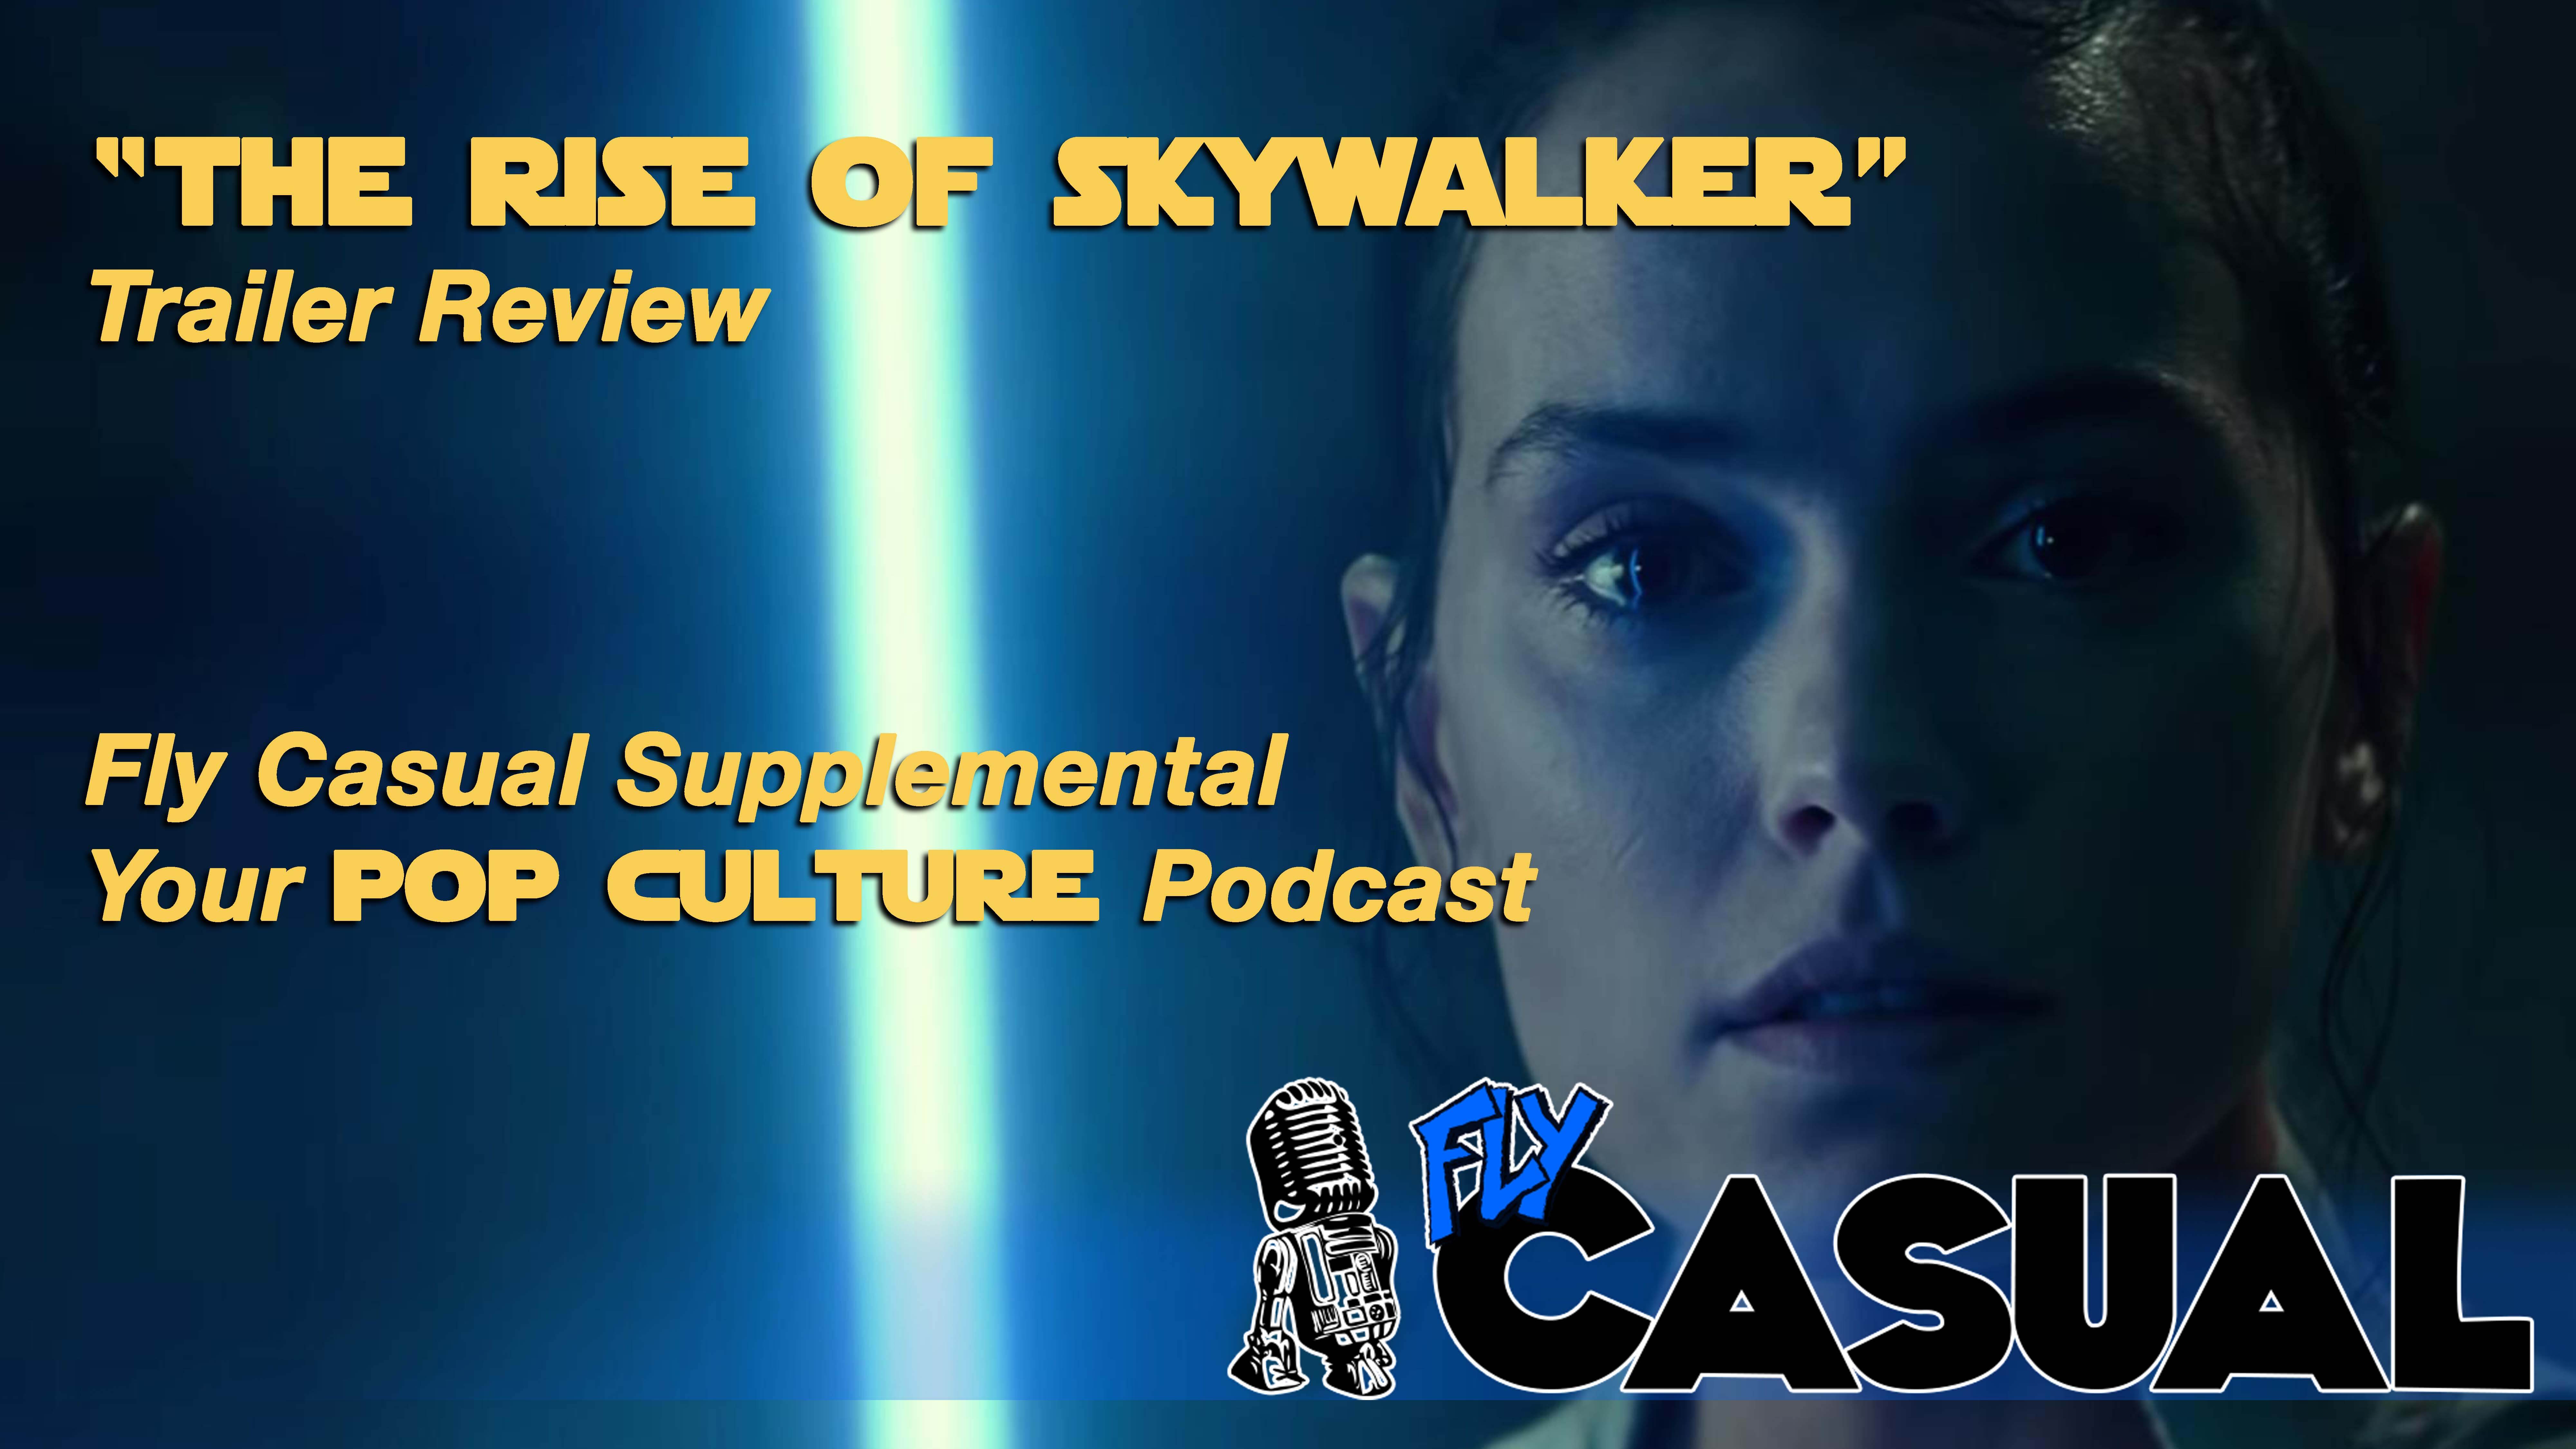 Movie Trailer Review: Star Wars The Rise of Skywalker